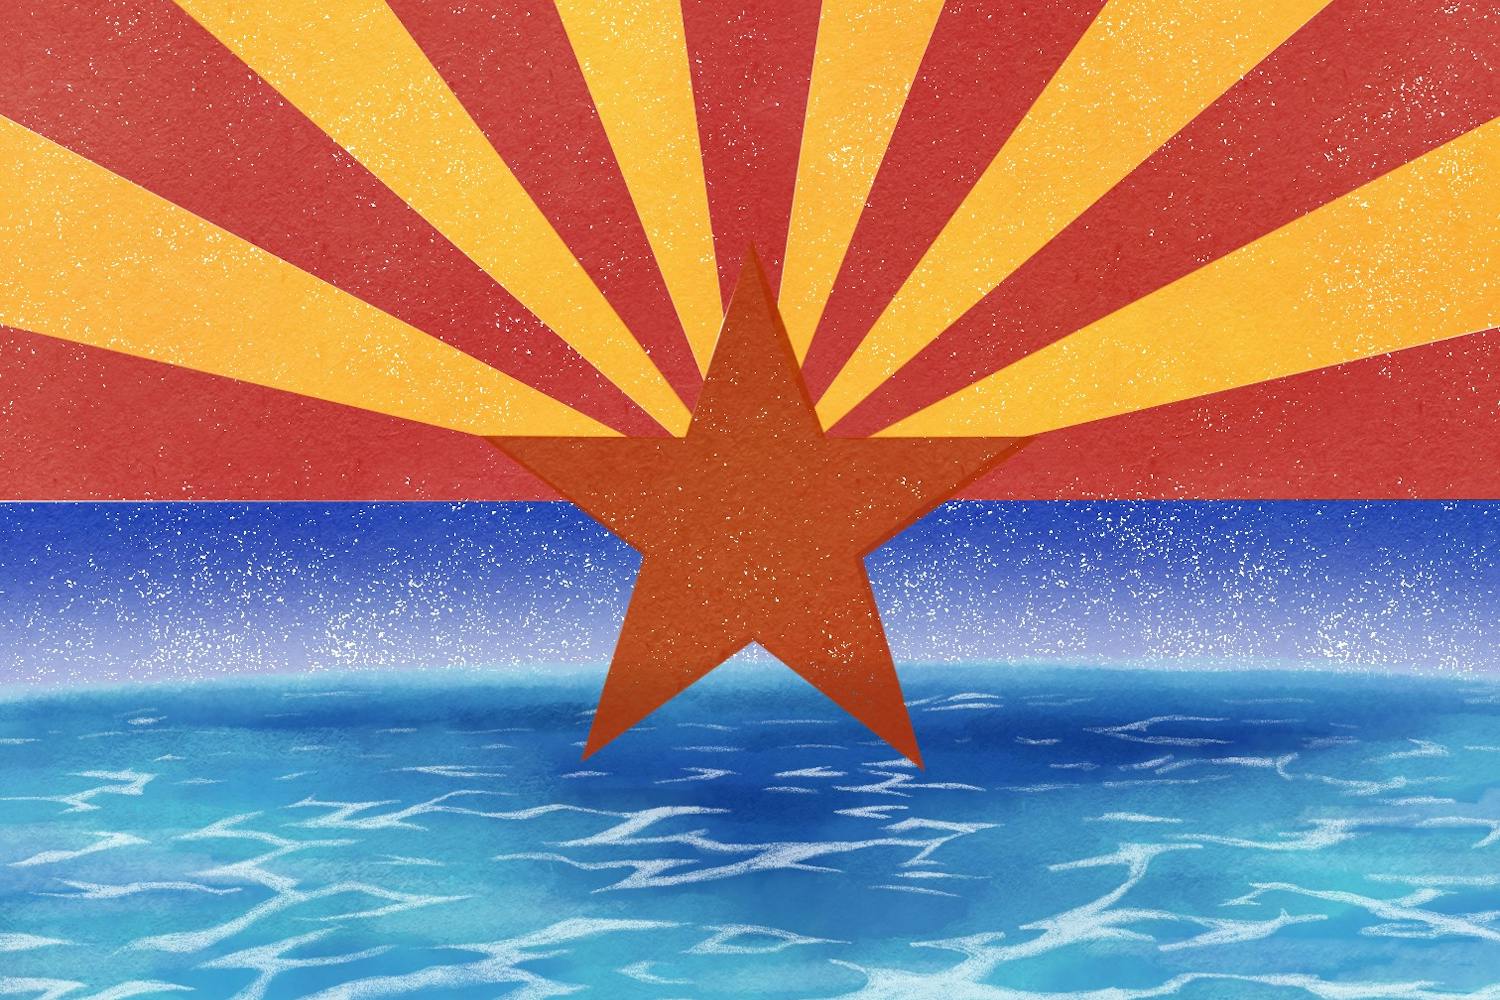 The Arizona Water Innovation Initiative is now halfway through its "one year of innovation" for developing actionable solutions for water usage.